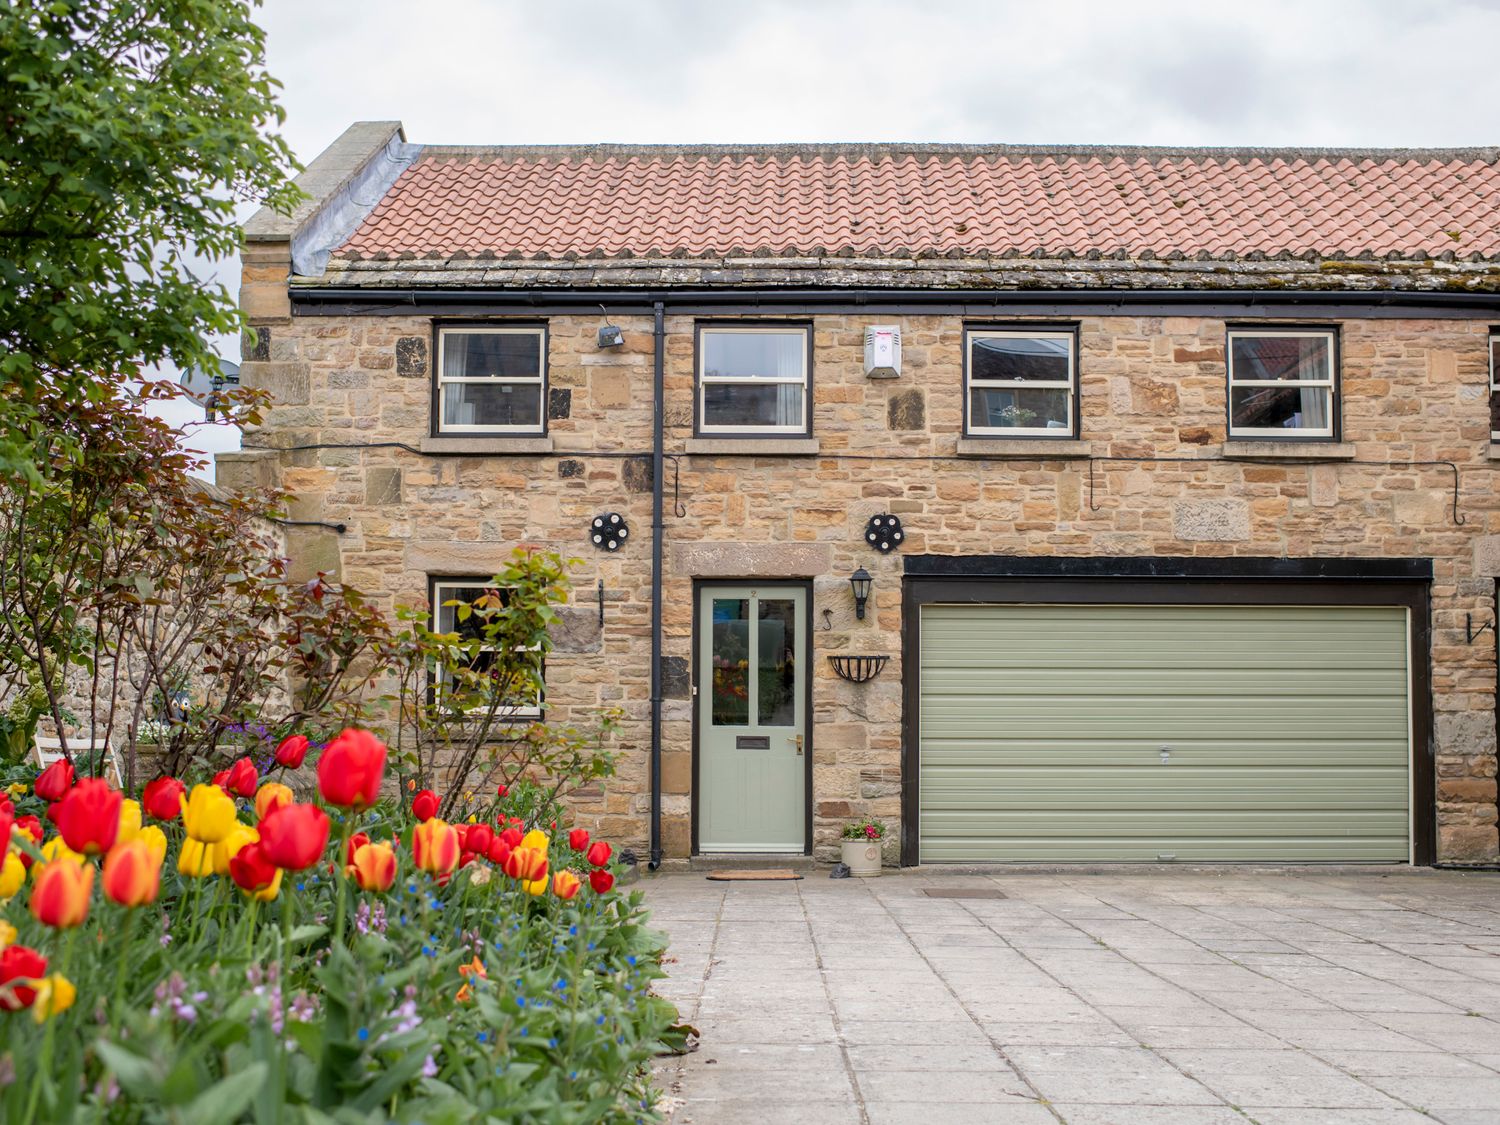 County Durham Holiday Cottages: Barn House Mews, Gainford | sykescottages.co.uk